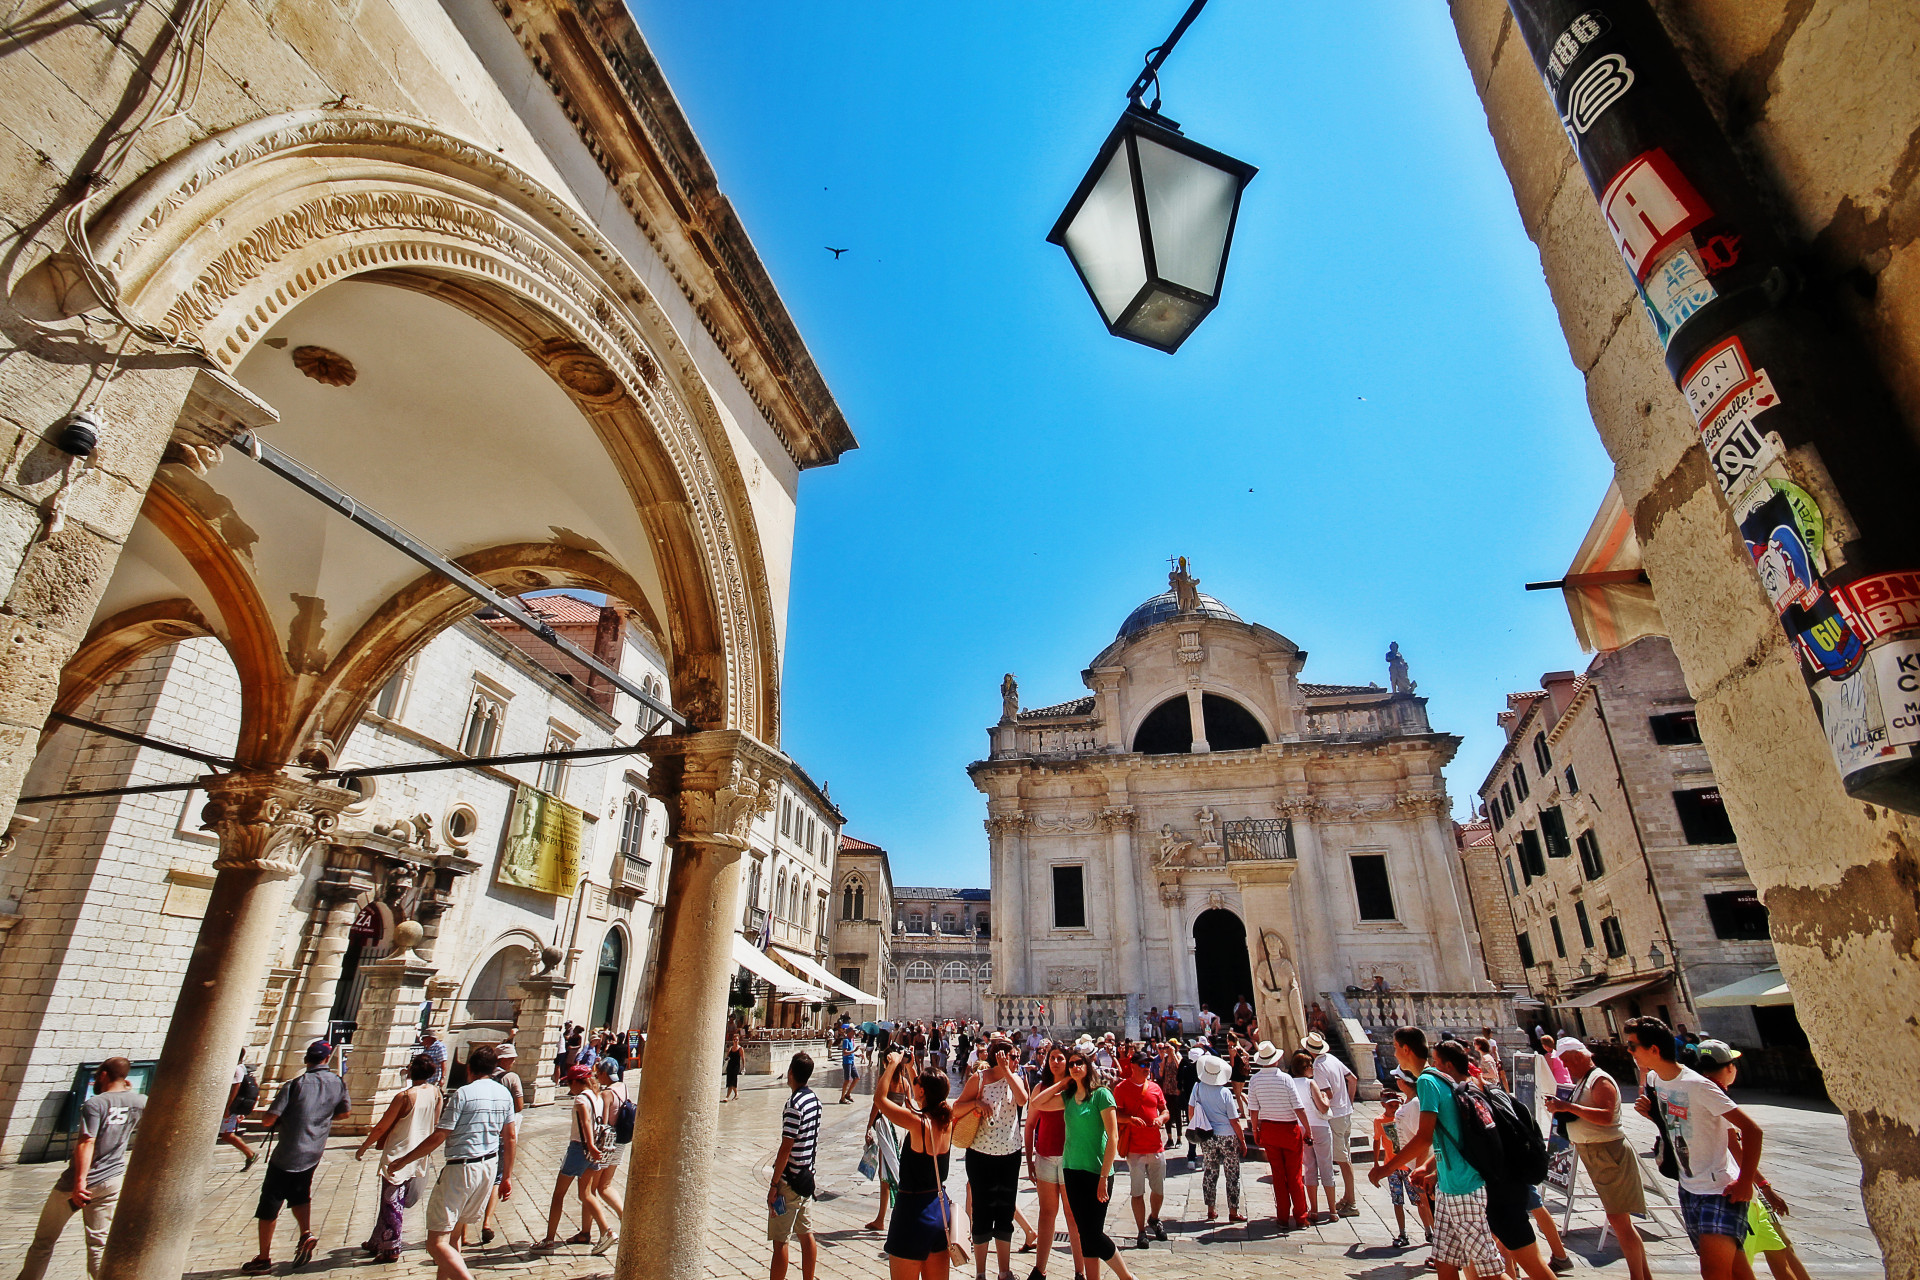 One of the most popular meeting points in the city is Luza Square, at the eastern end of Stradun. Go for a stroll here and take it all in.<p>You may also like:<a href="https://www.starsinsider.com/n/176350?utm_source=msn.com&utm_medium=display&utm_campaign=referral_description&utm_content=208346v2en-sg"> The world's most awe-inspiring natural phenomena</a></p>